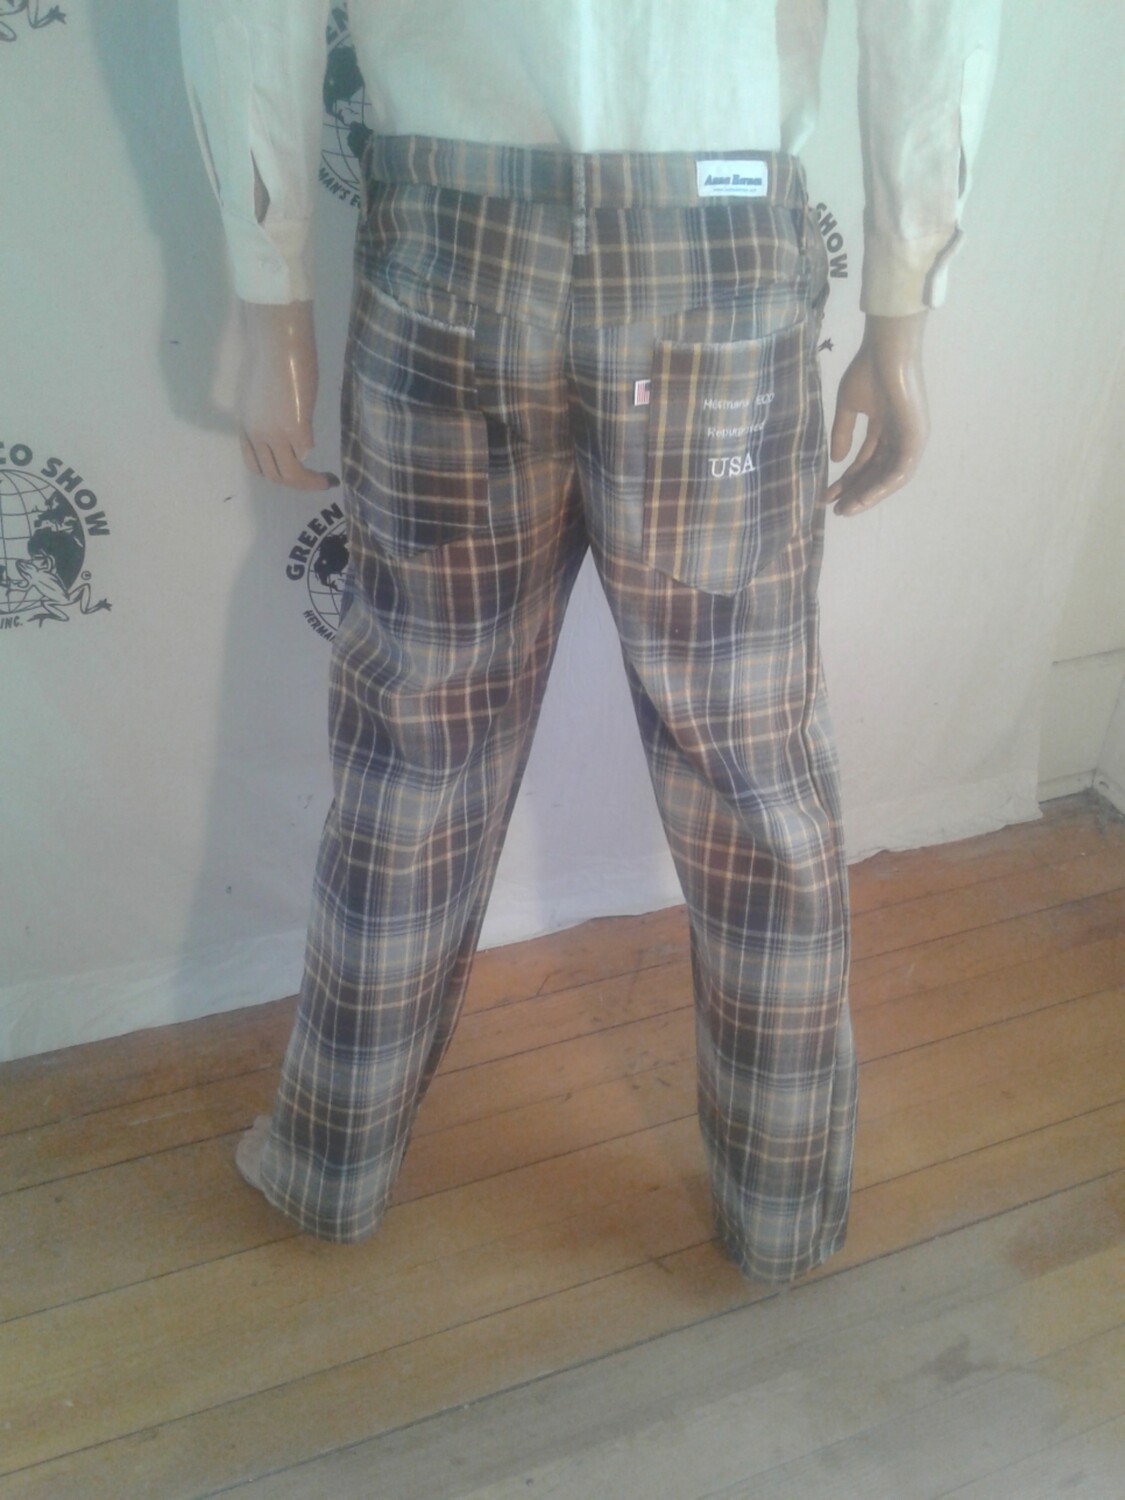 Plaid jeans 36 X 32 Hermans made in uUSA